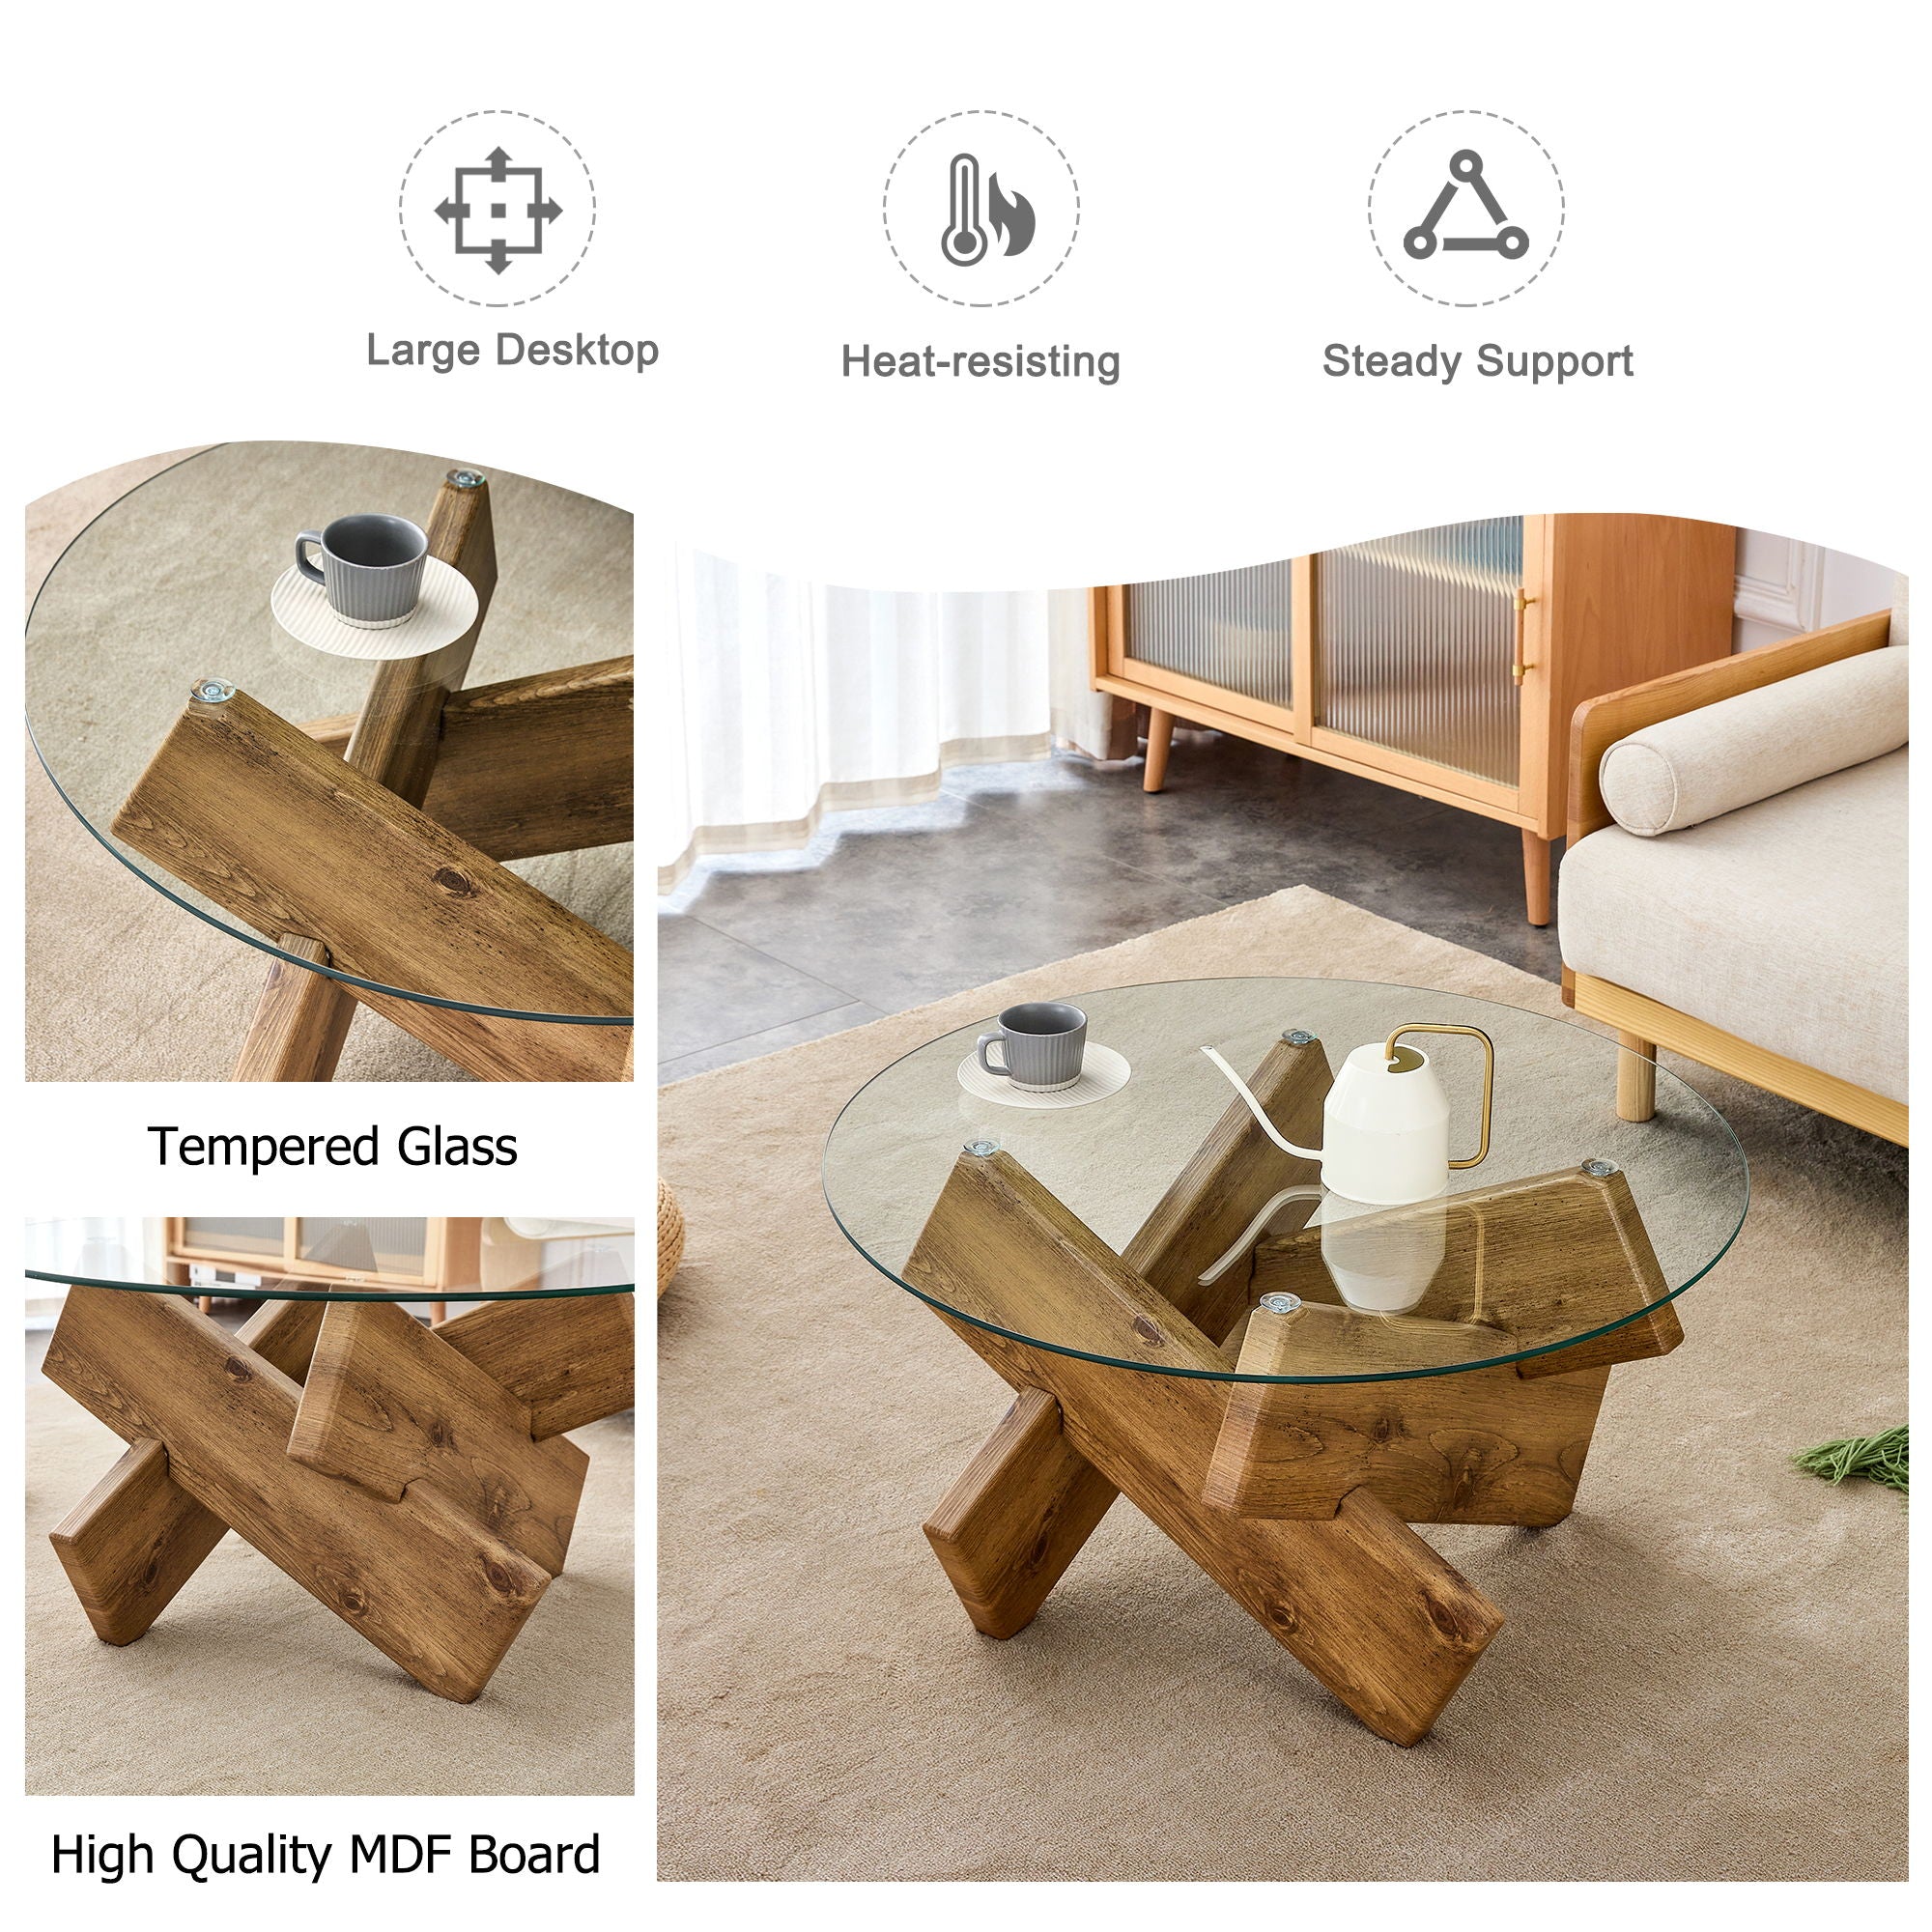 Circular Glass Coffee Table, Modern And Distinctive Design Tea Table Tempered Glass Countertop, Wood Colored MDF Table Legs Suitable For Living Rooms And Farmhouses